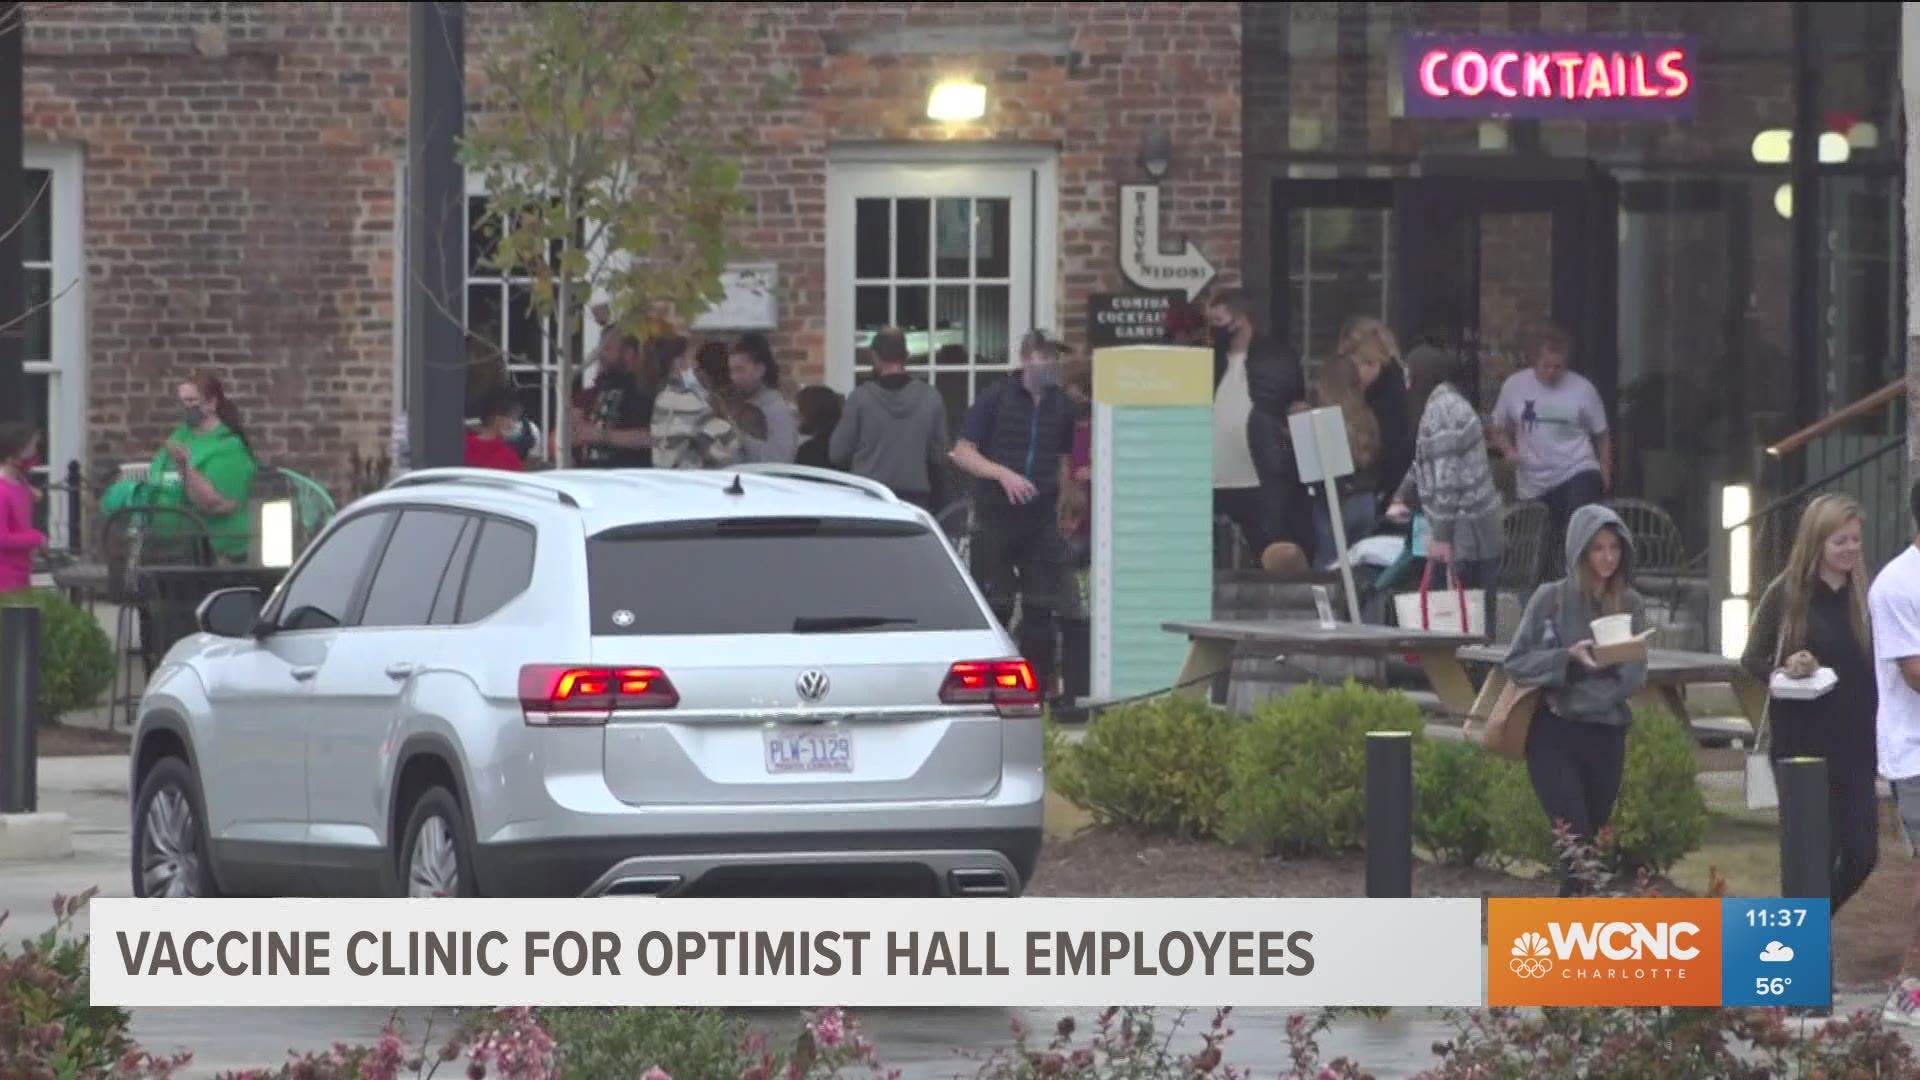 Optimist Hall said all of its employees, including sanitation staff and security, are eligible for a shot.